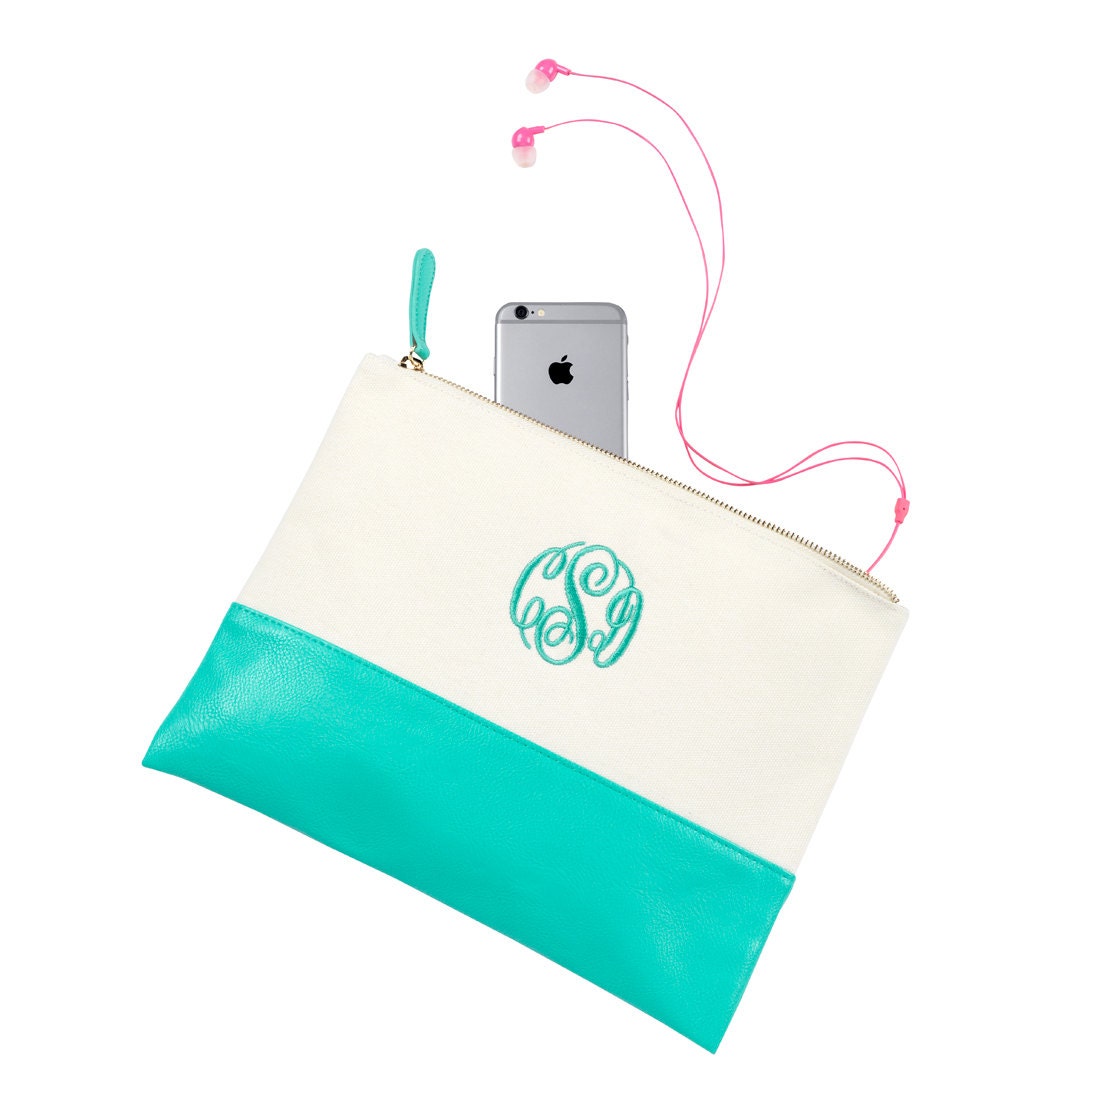 Monogrammed makeup bag, personaized cosmetic pouch